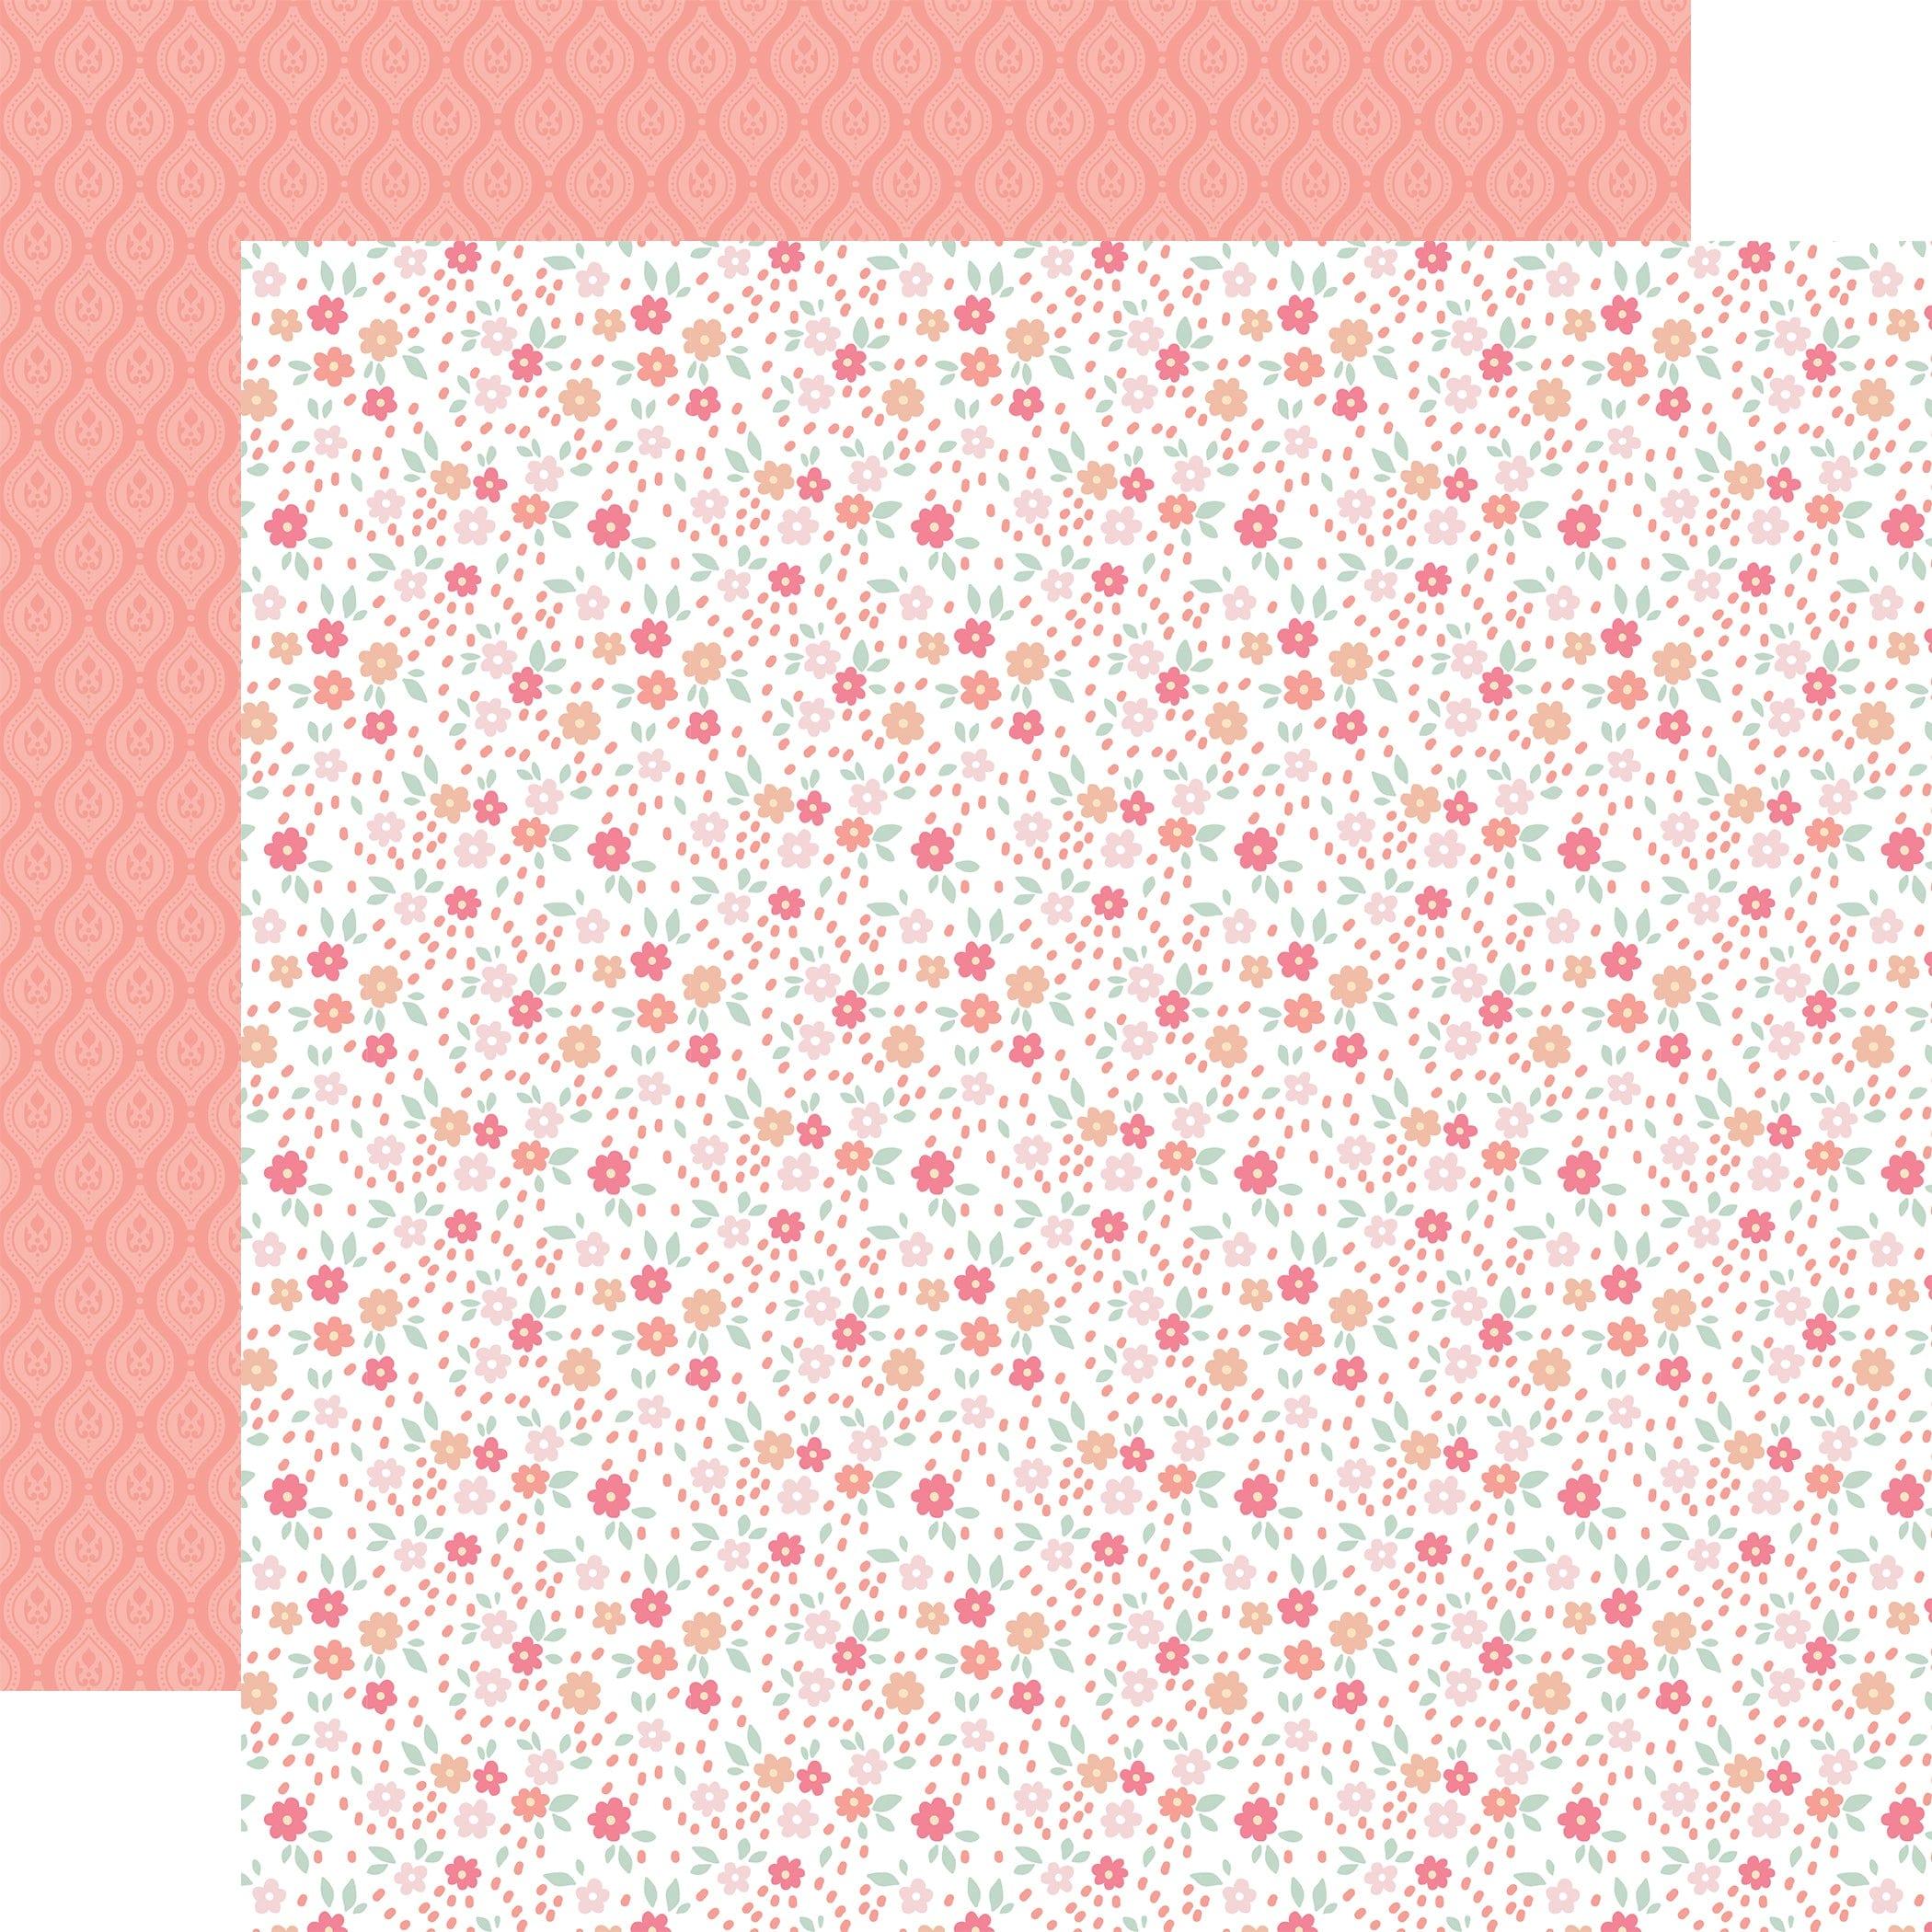 Our Little Princess Collection Blossoming Buds 12 x 12 Double-Sided Scrapbook Paper by Echo Park Paper - Scrapbook Supply Companies